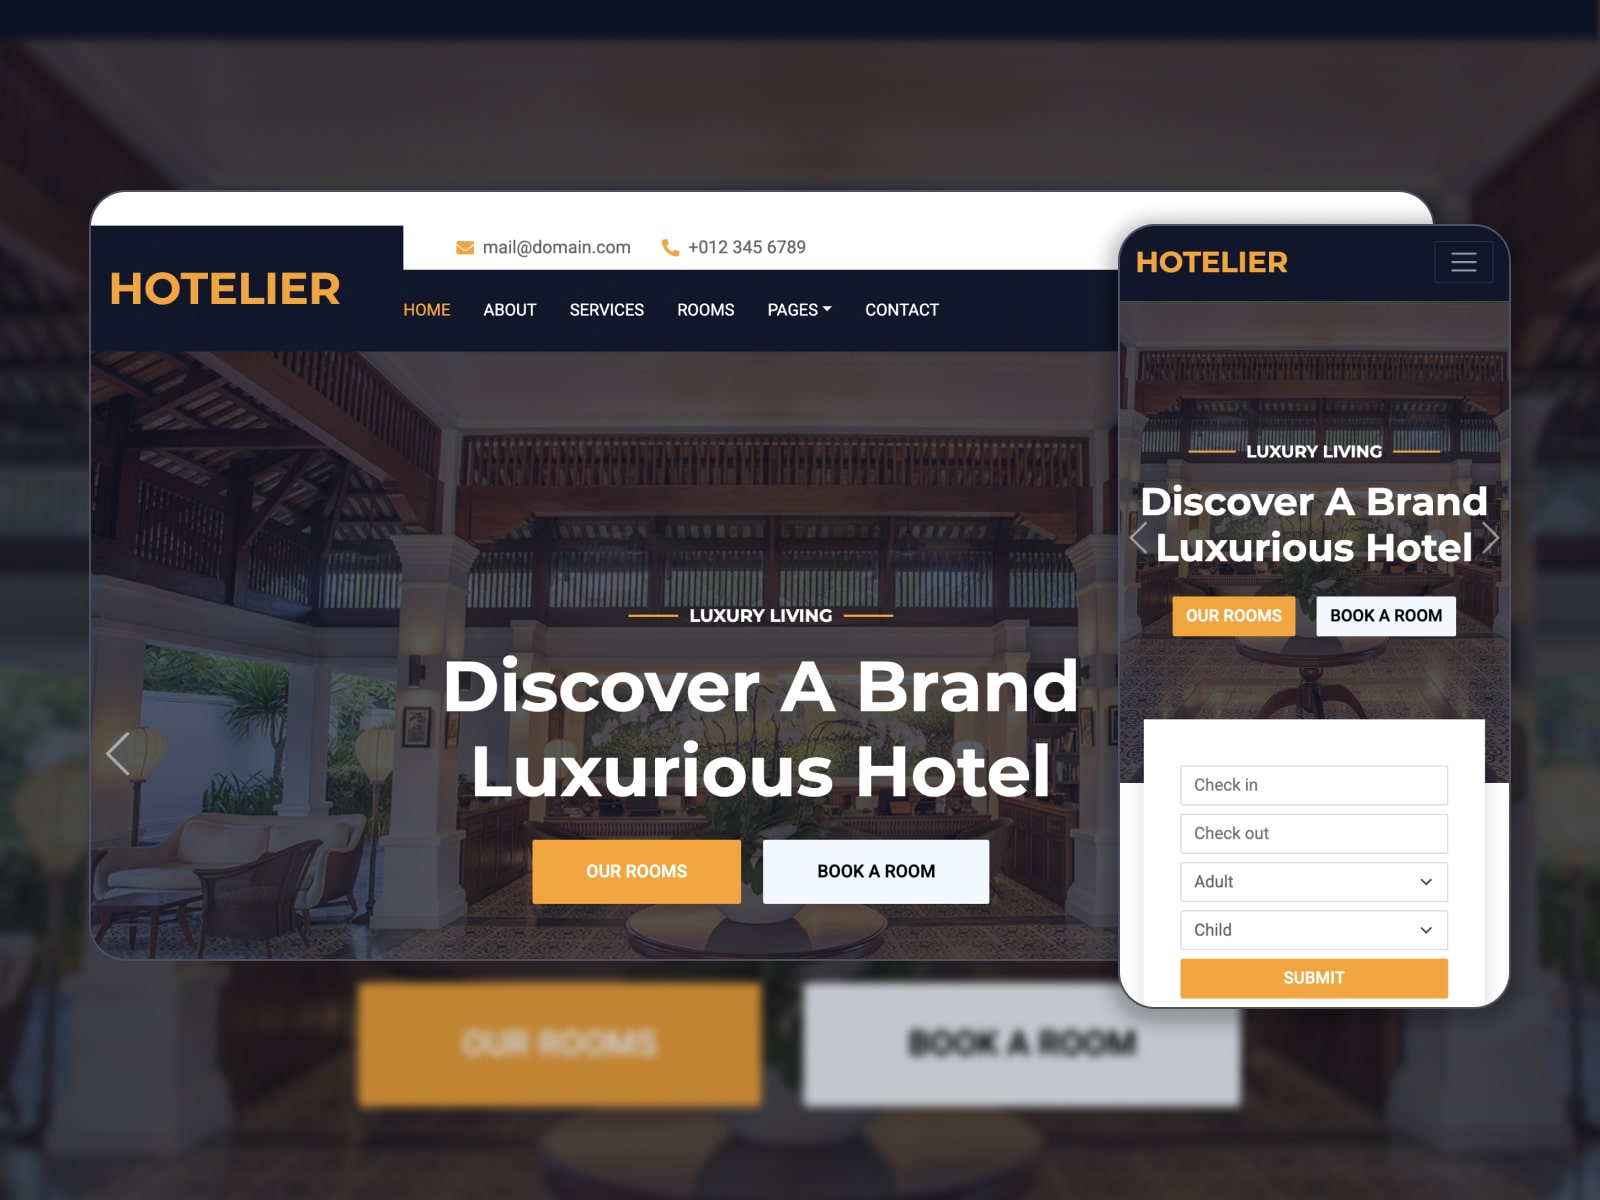 Collage of the free Hotelier HTML template for hotel and apartment websites in brown, orange and white colors.